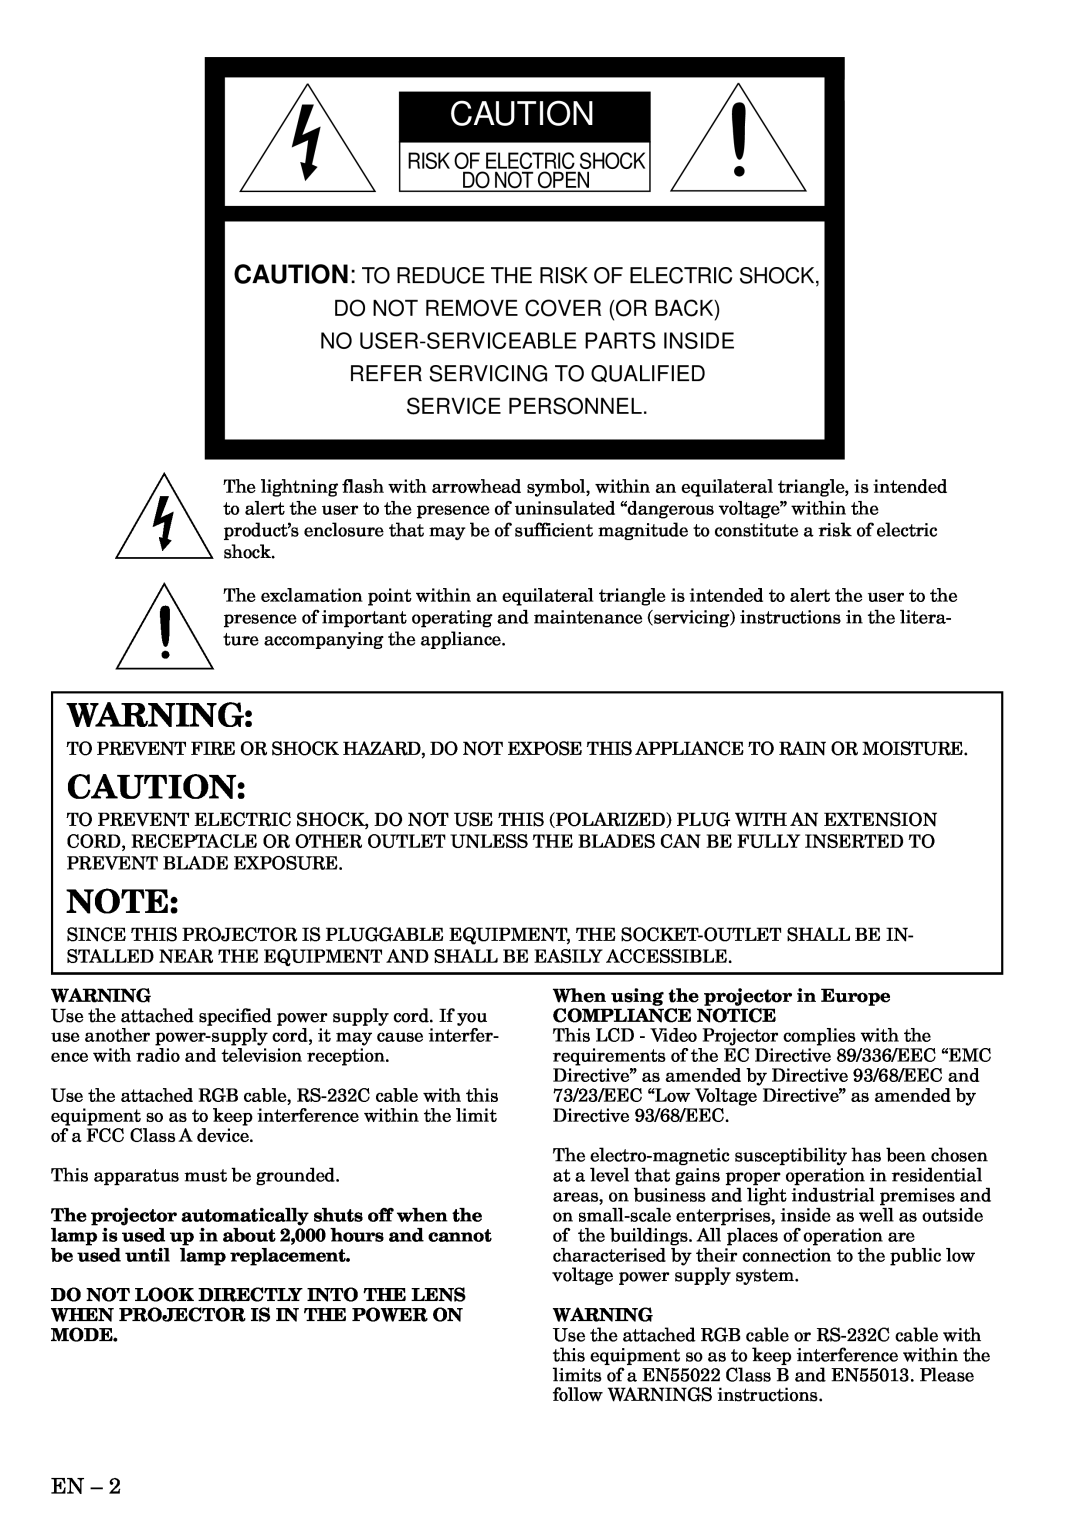 Mitsubishi Electronics X50, X70 user manual Risk Of Electric Shock Do Not Open, Caution To Reduce The Risk Of Electric Shock 